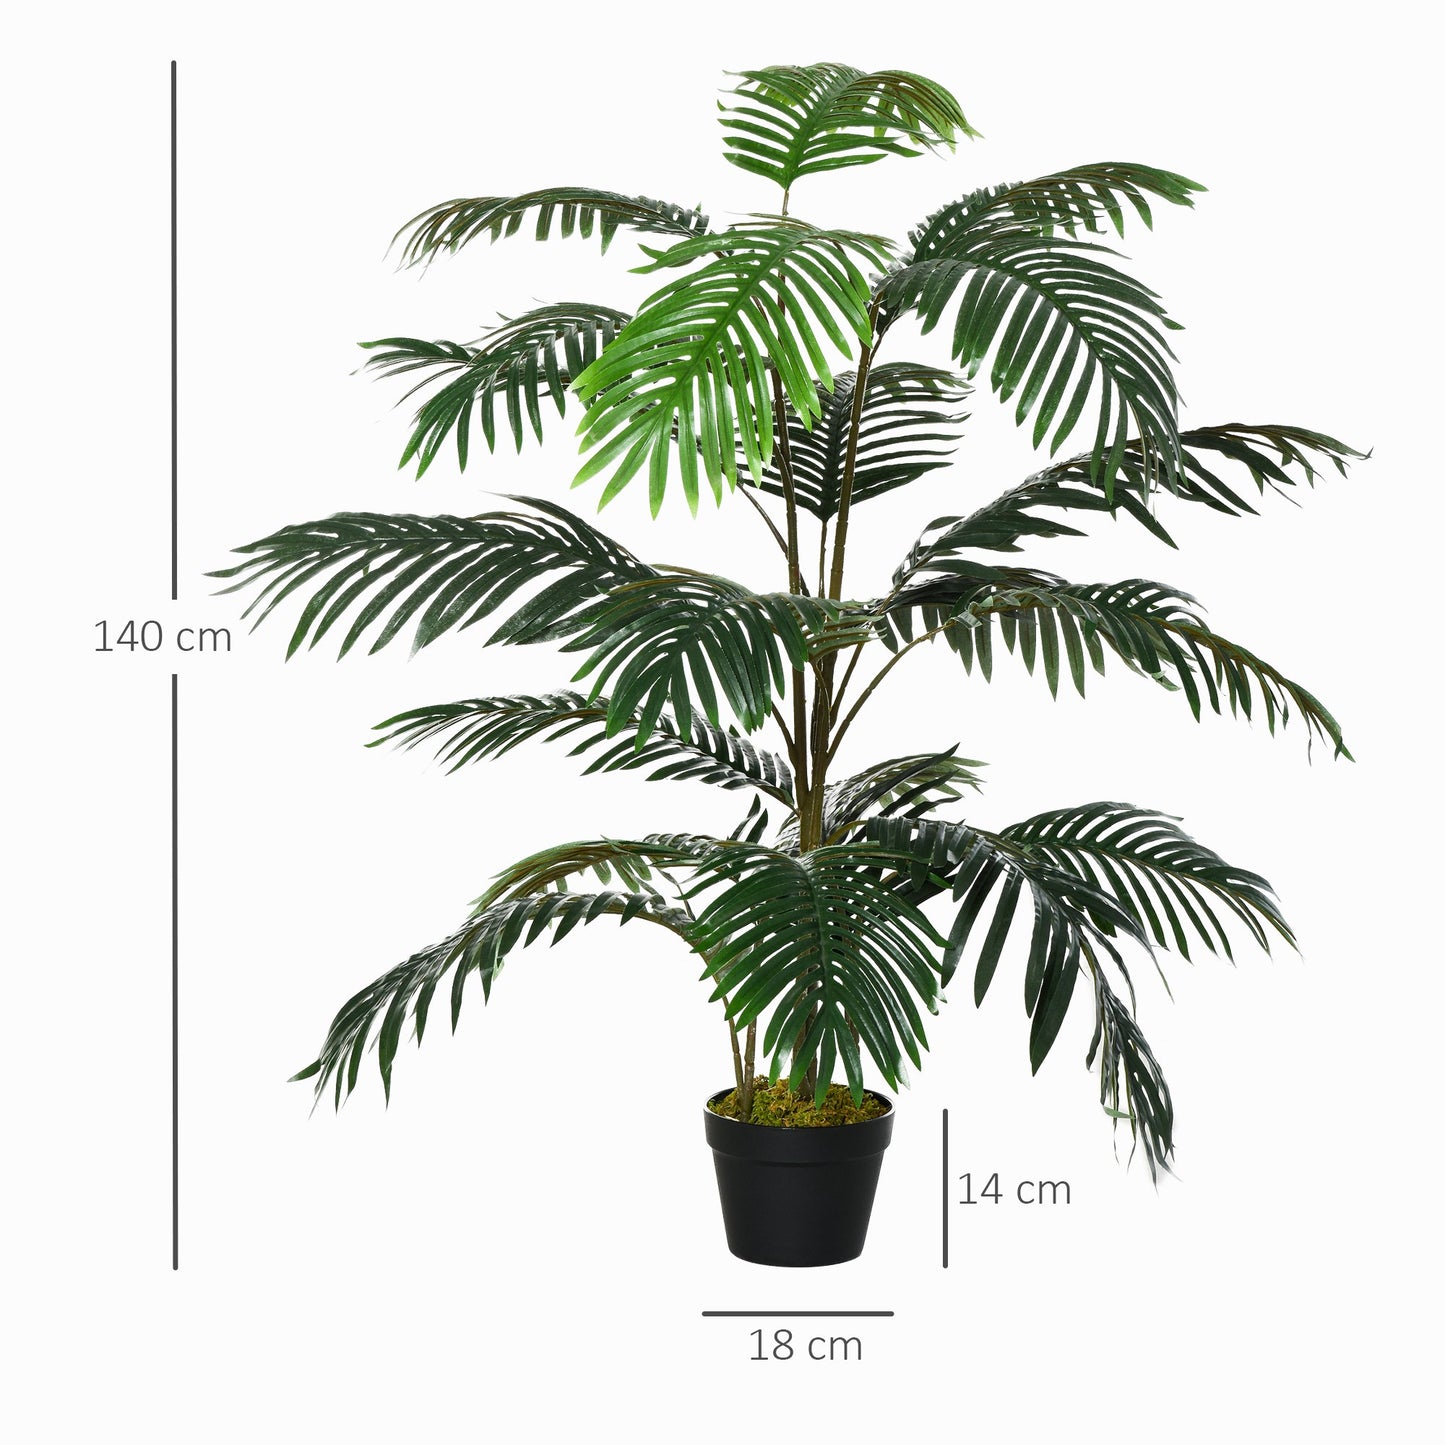 Outsunny 140cm/4.6FT Artificial Palm Plant Decorative Tree w/ 20 Leaves Nursery Pot Fake Plastic Indoor Outdoor Greenery Home Office Décor